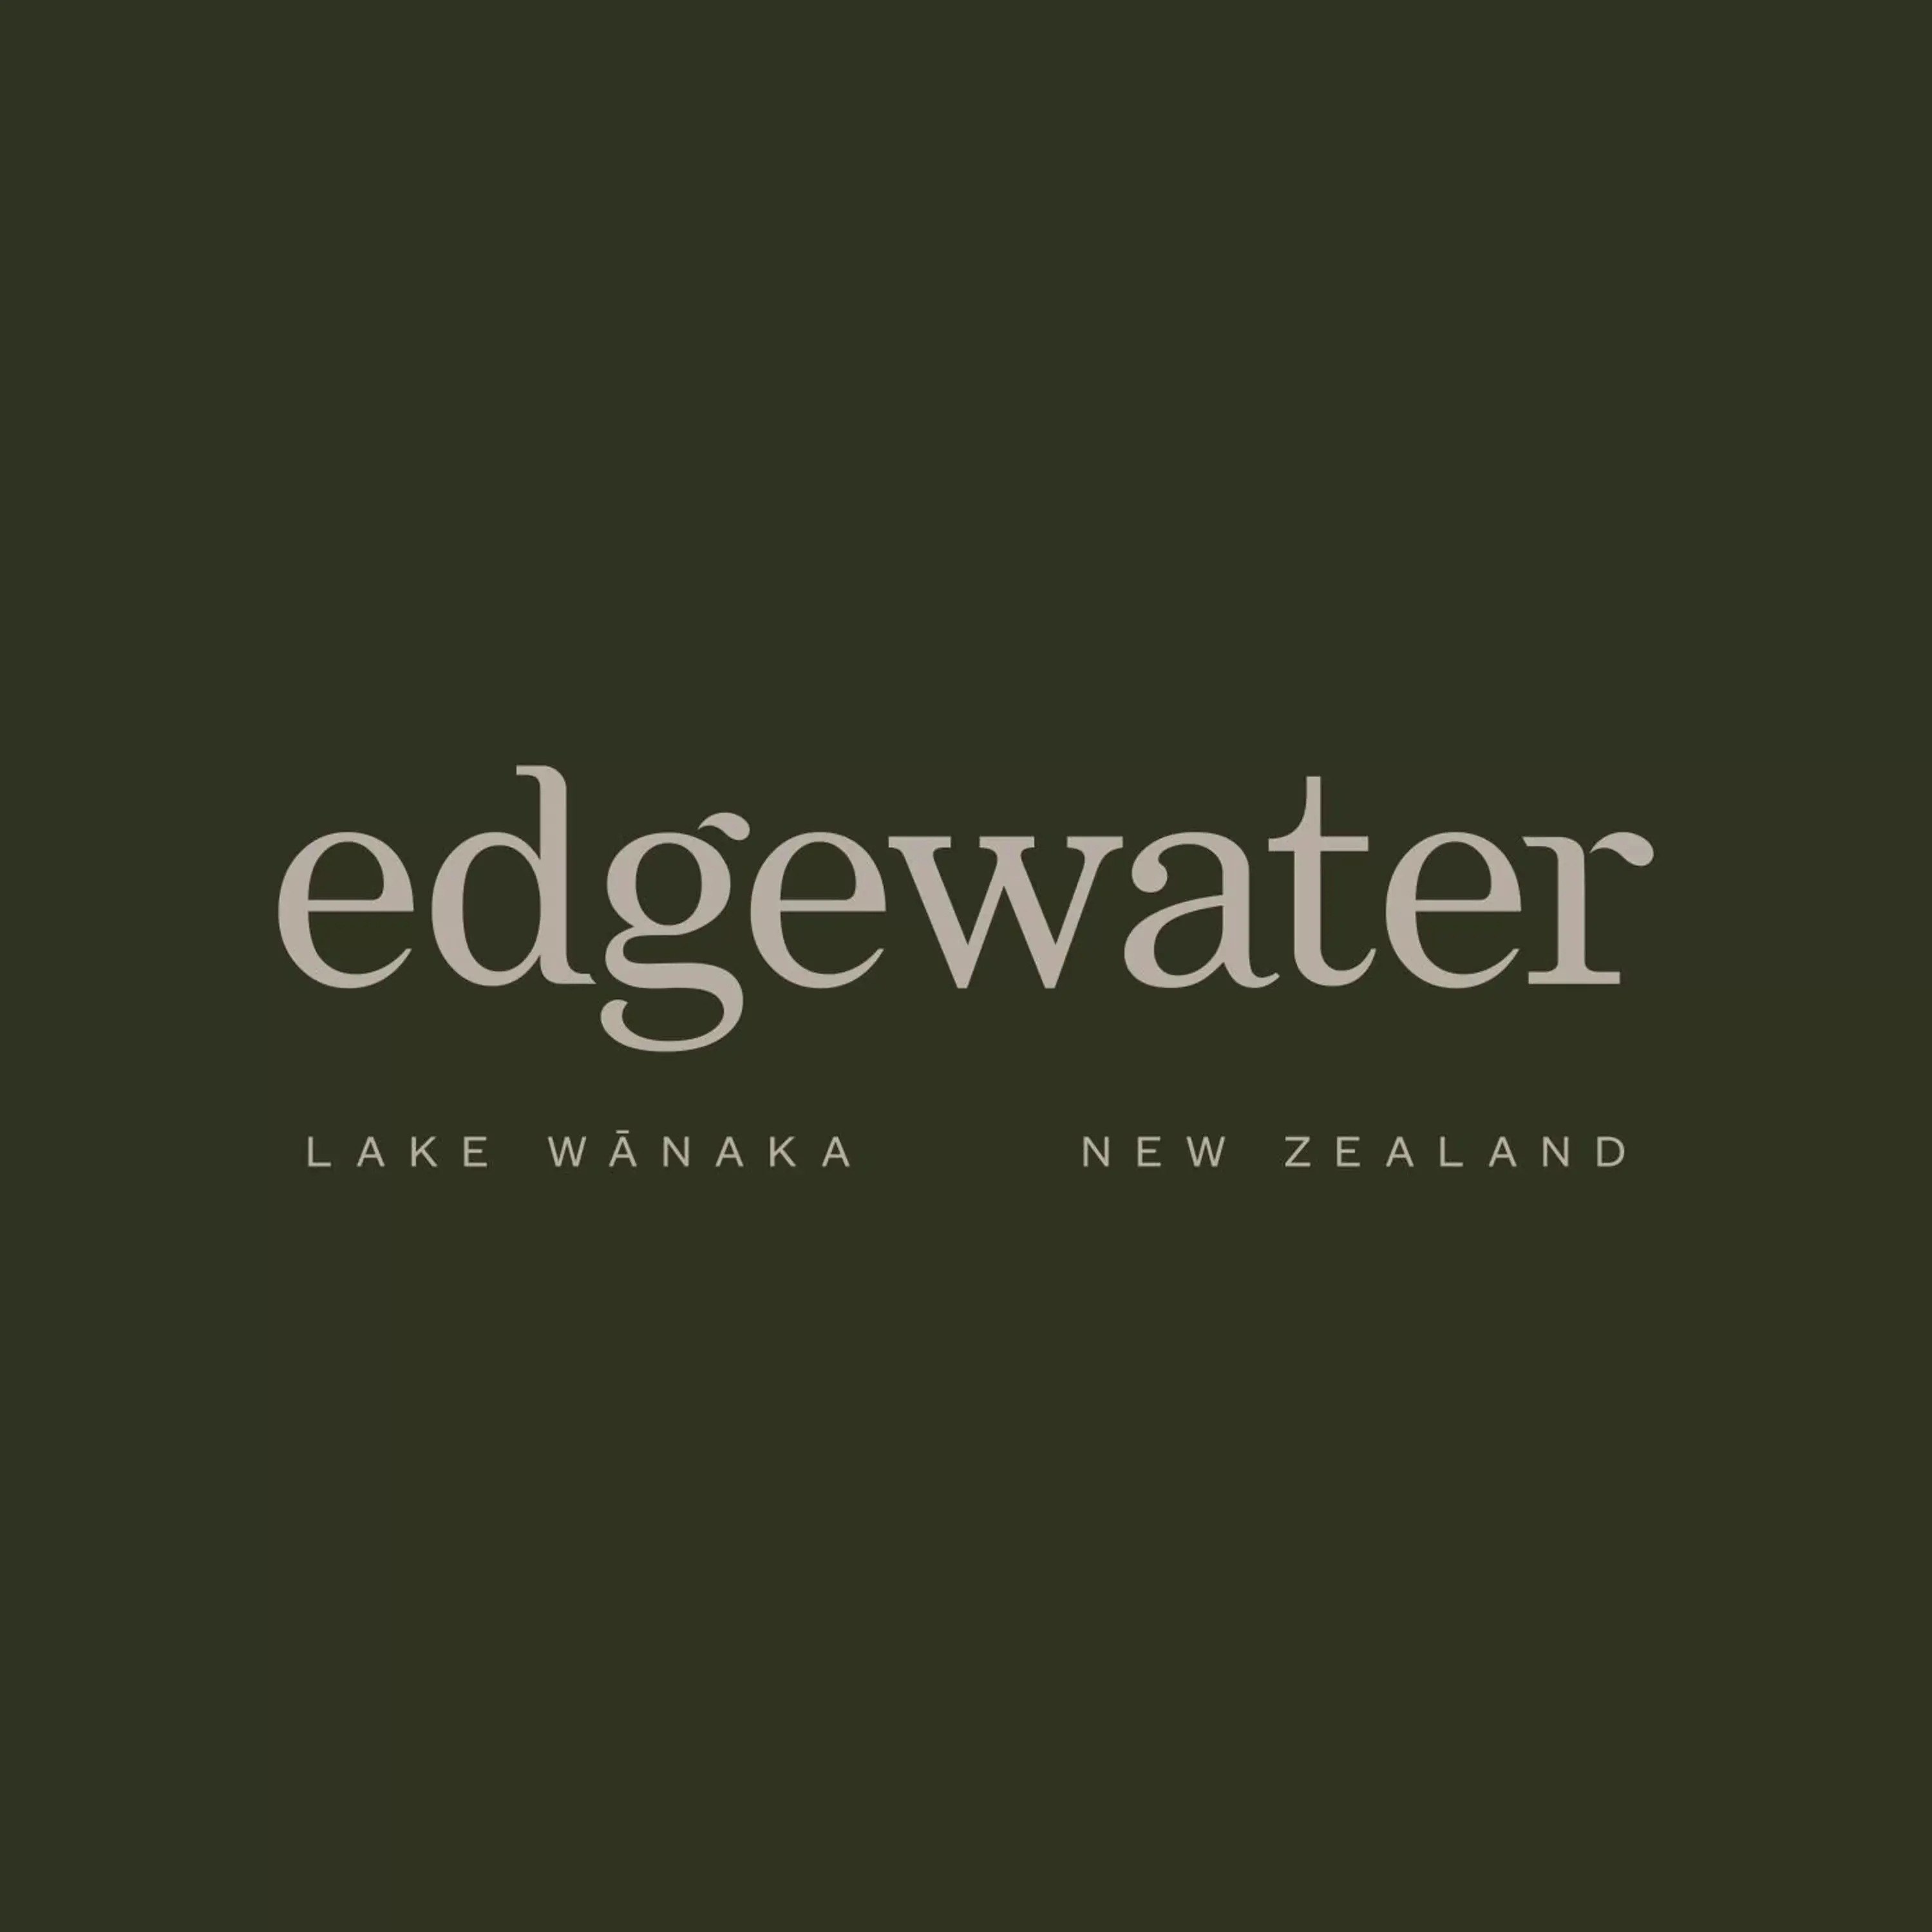 Logo/Certificate/Sign, Property Logo/Sign in Edgewater Hotel